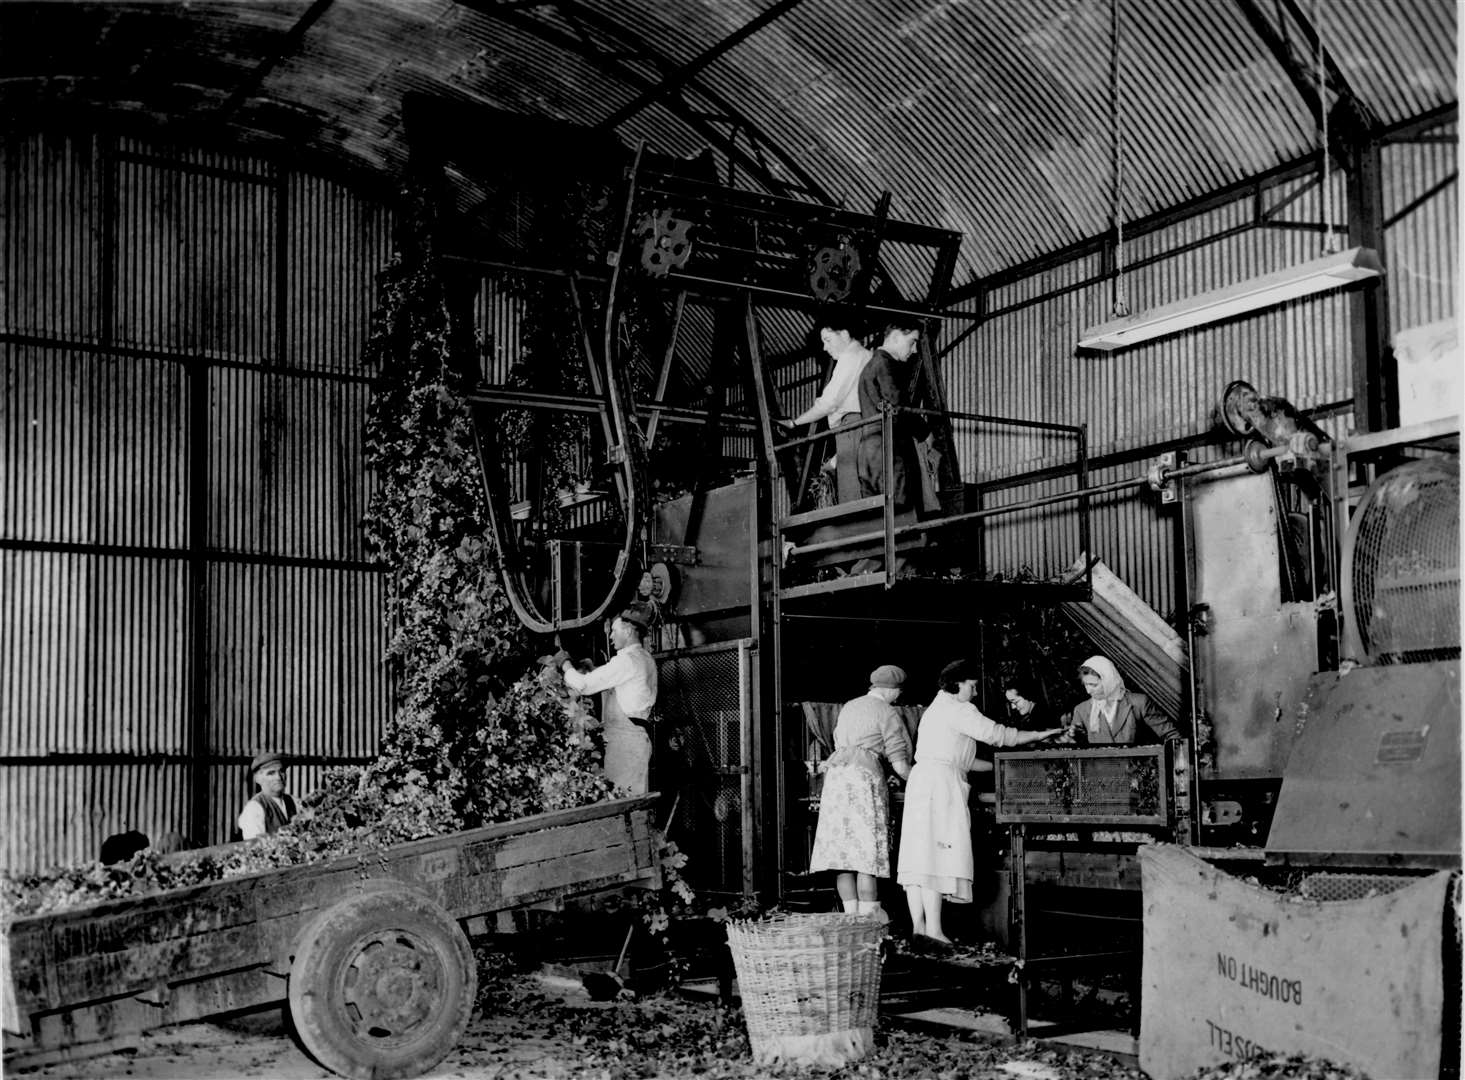 A hop-picking machine in action at Tony Redsell's farm at Boughton in September 1954. The use of such machines grew in response to a labour shortage